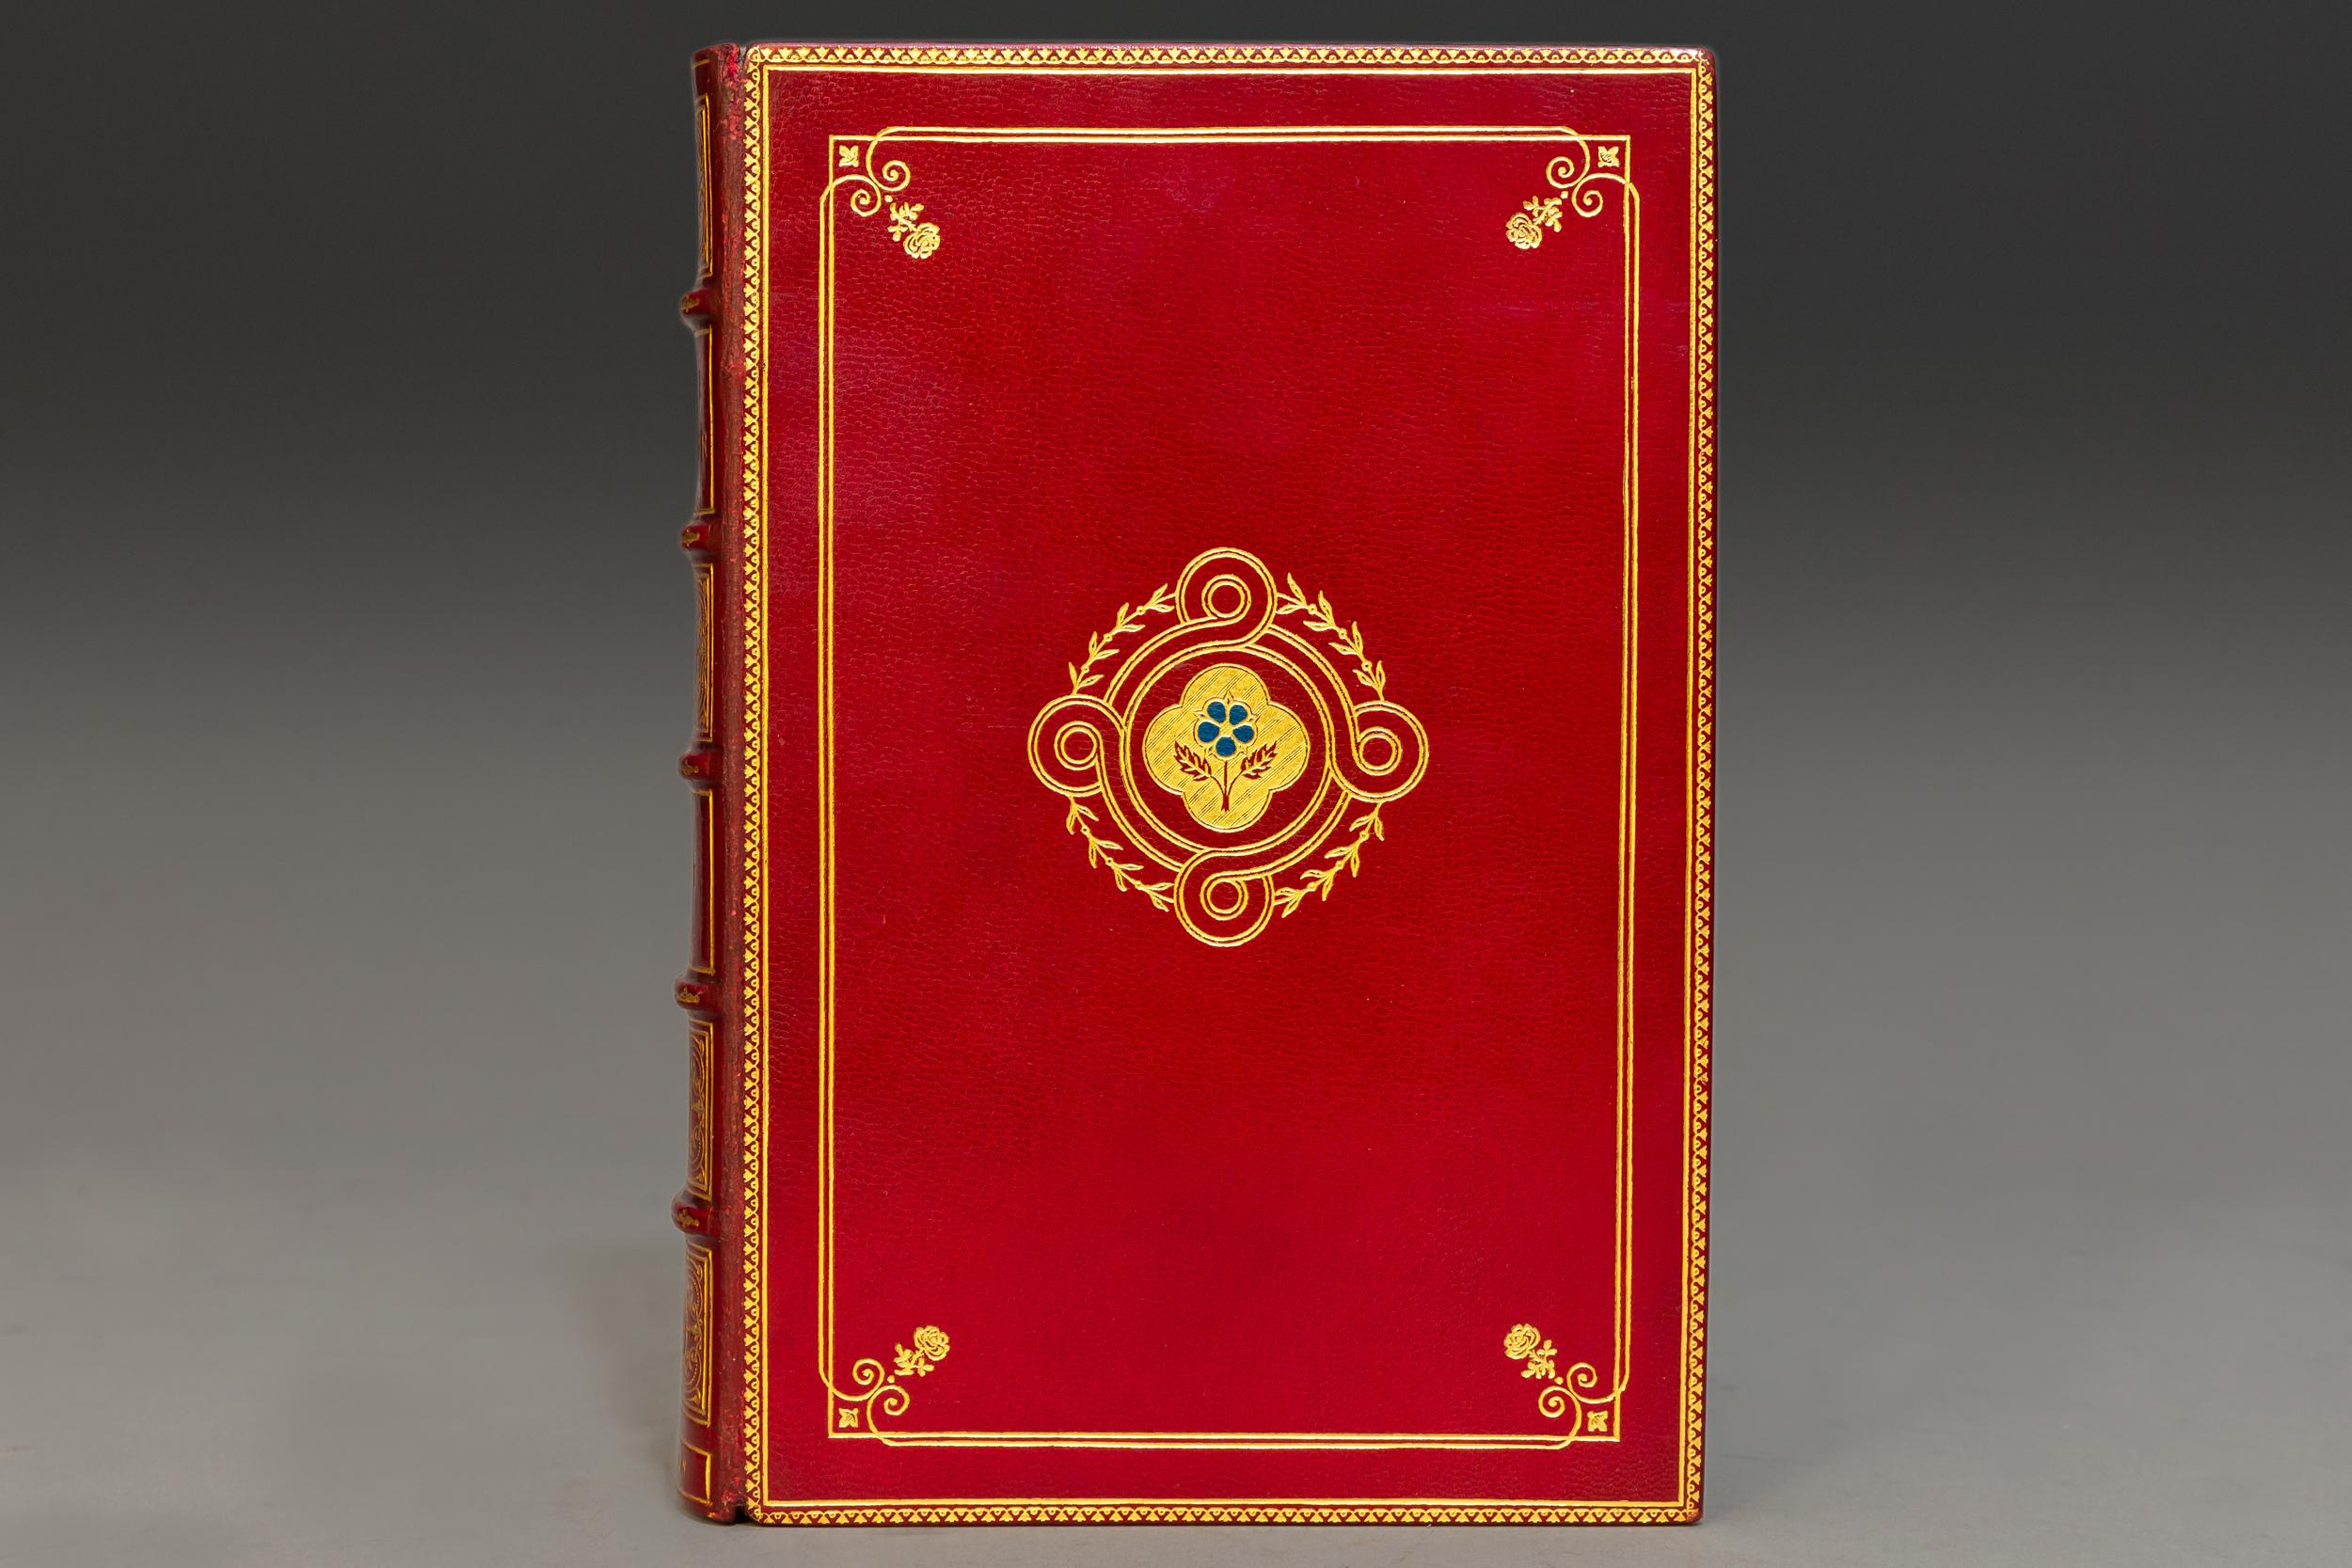 1 volume.

Bound in full wine morocco,
Top edges gilt, raised bands, ornate gilt on spine and covers, illustrated in
Color by Russell Flint.

Published: Boston and London: The Medici Society.
N.D., circa 1930s. Handsome copy.